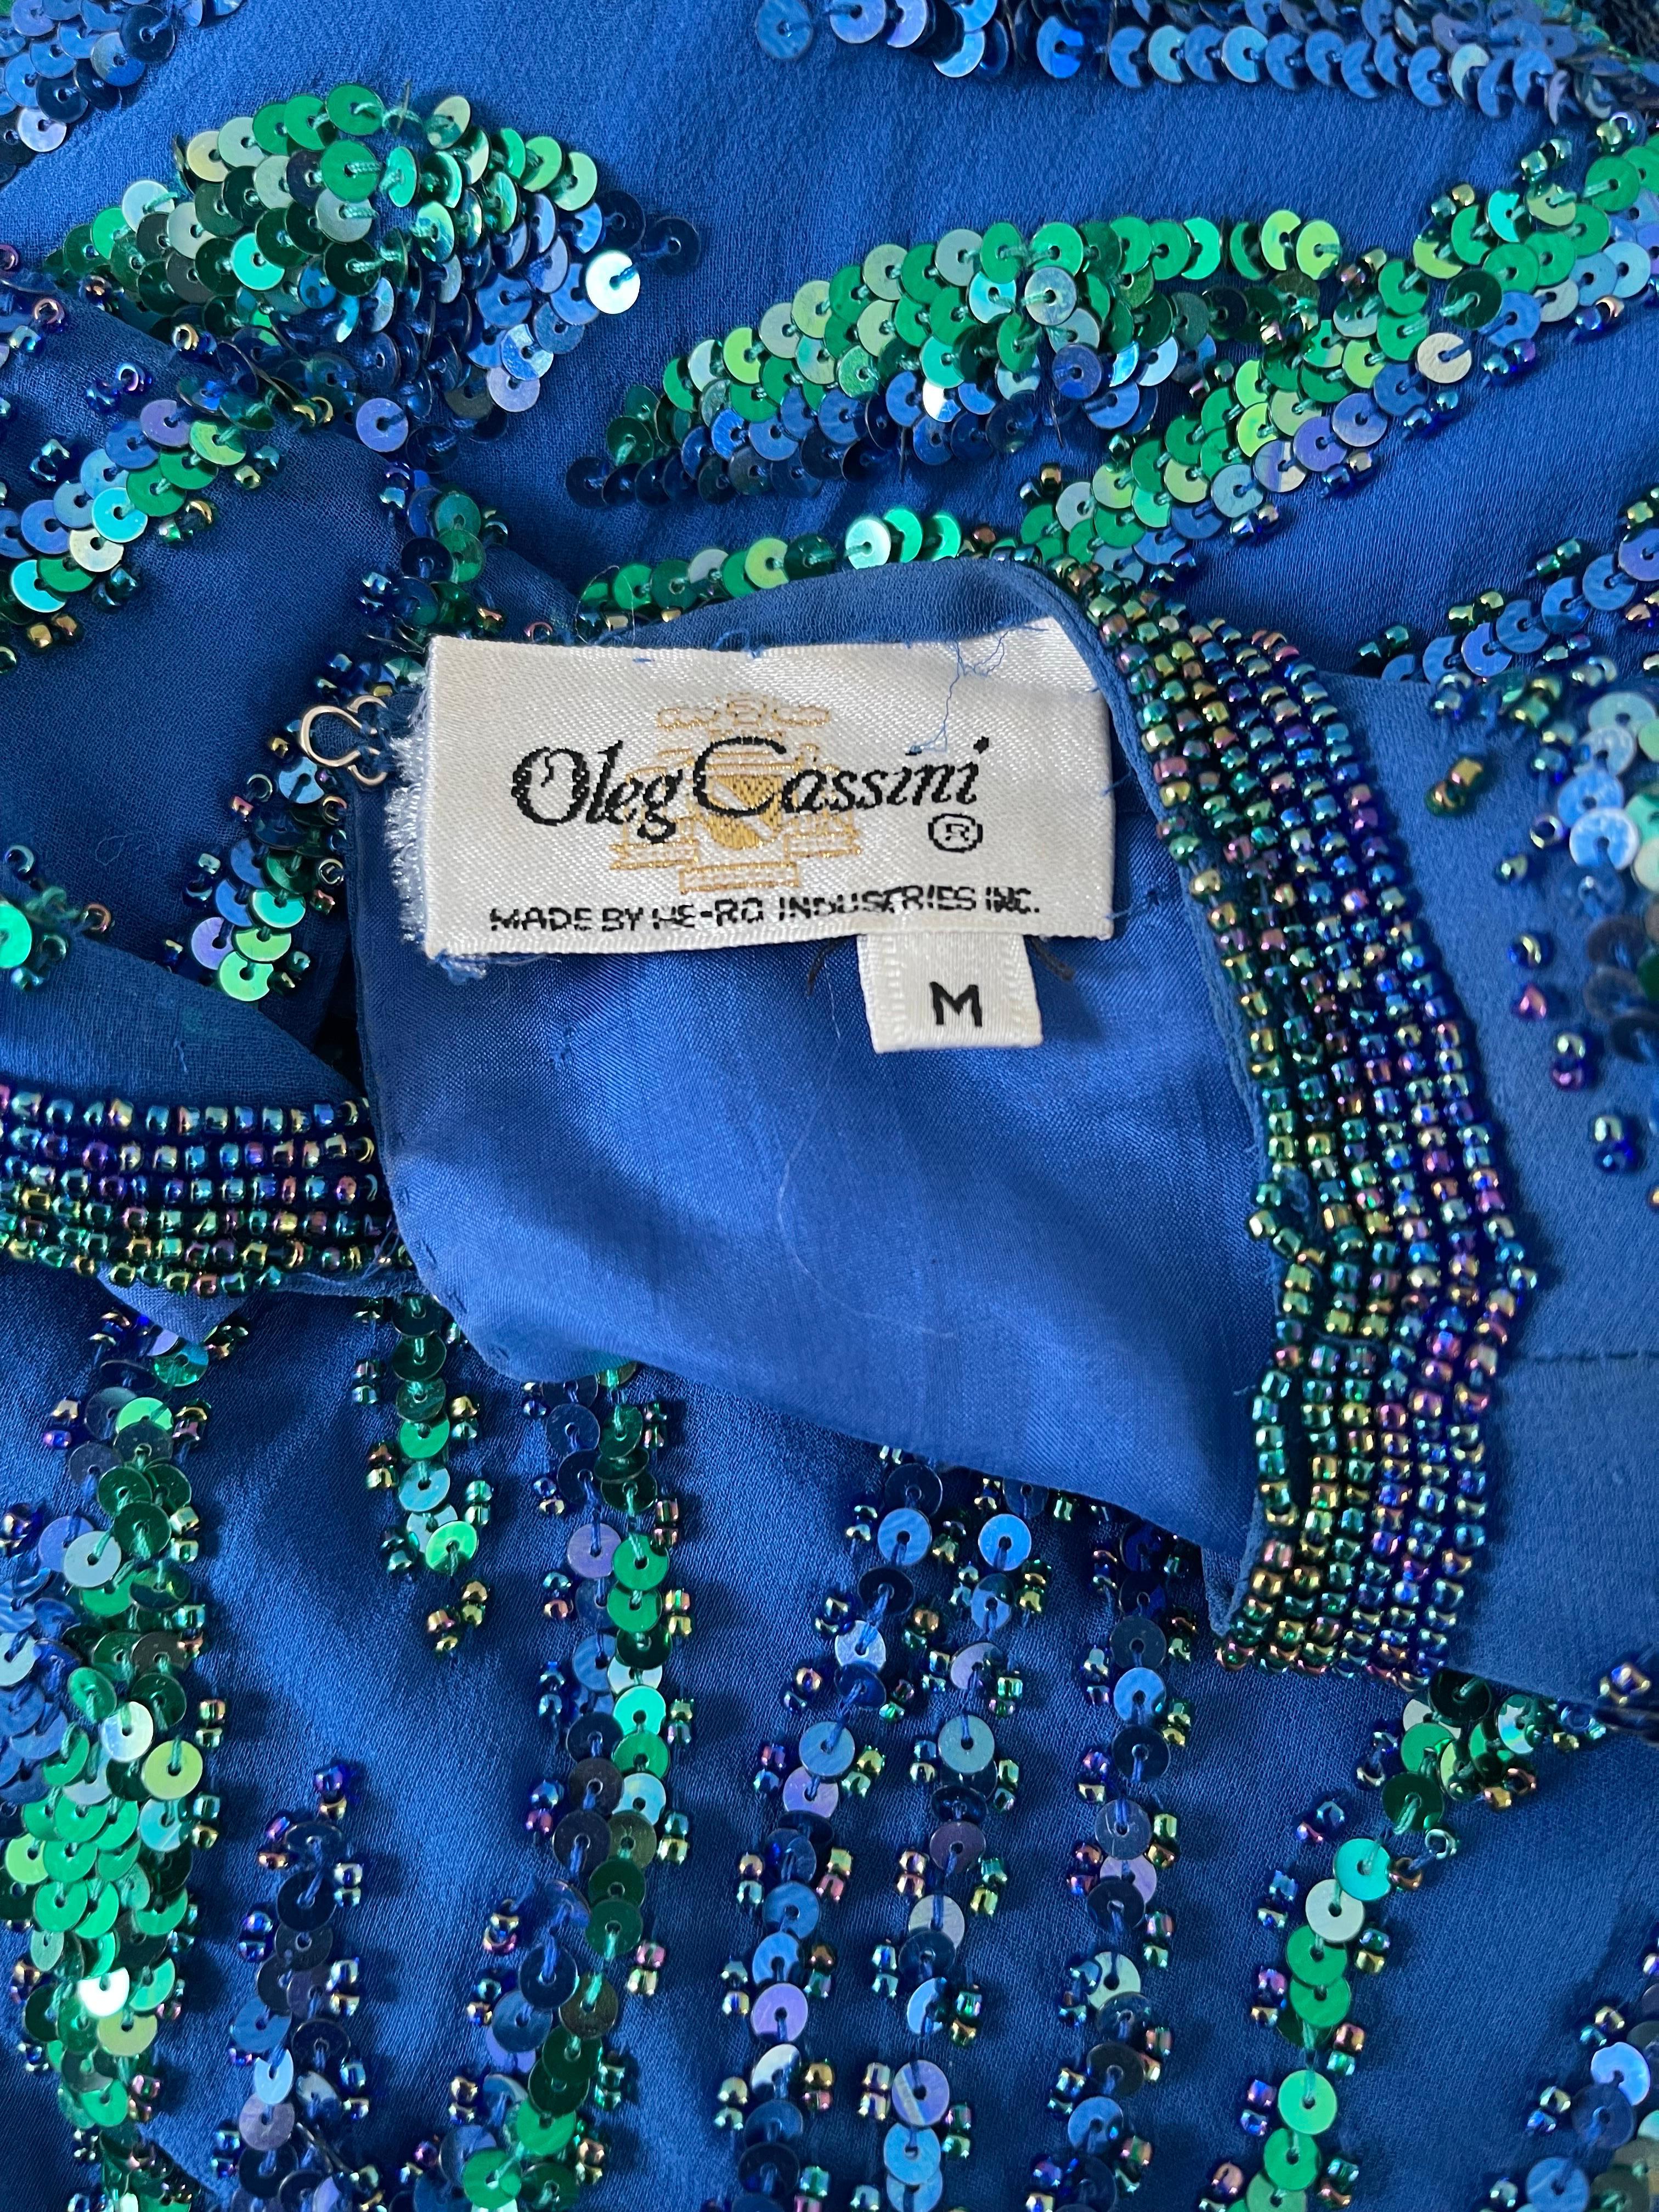 Beautiful 1980s OLEG CASSINI blue and green silk chiffon sequin and beaded long sleeve top ! Peacock colors — Thousands of hand-sewn sequins and beads throughout the entire shirt. Hidden zipper up the side. Hidden snaps at each sleeve cuff.
Can